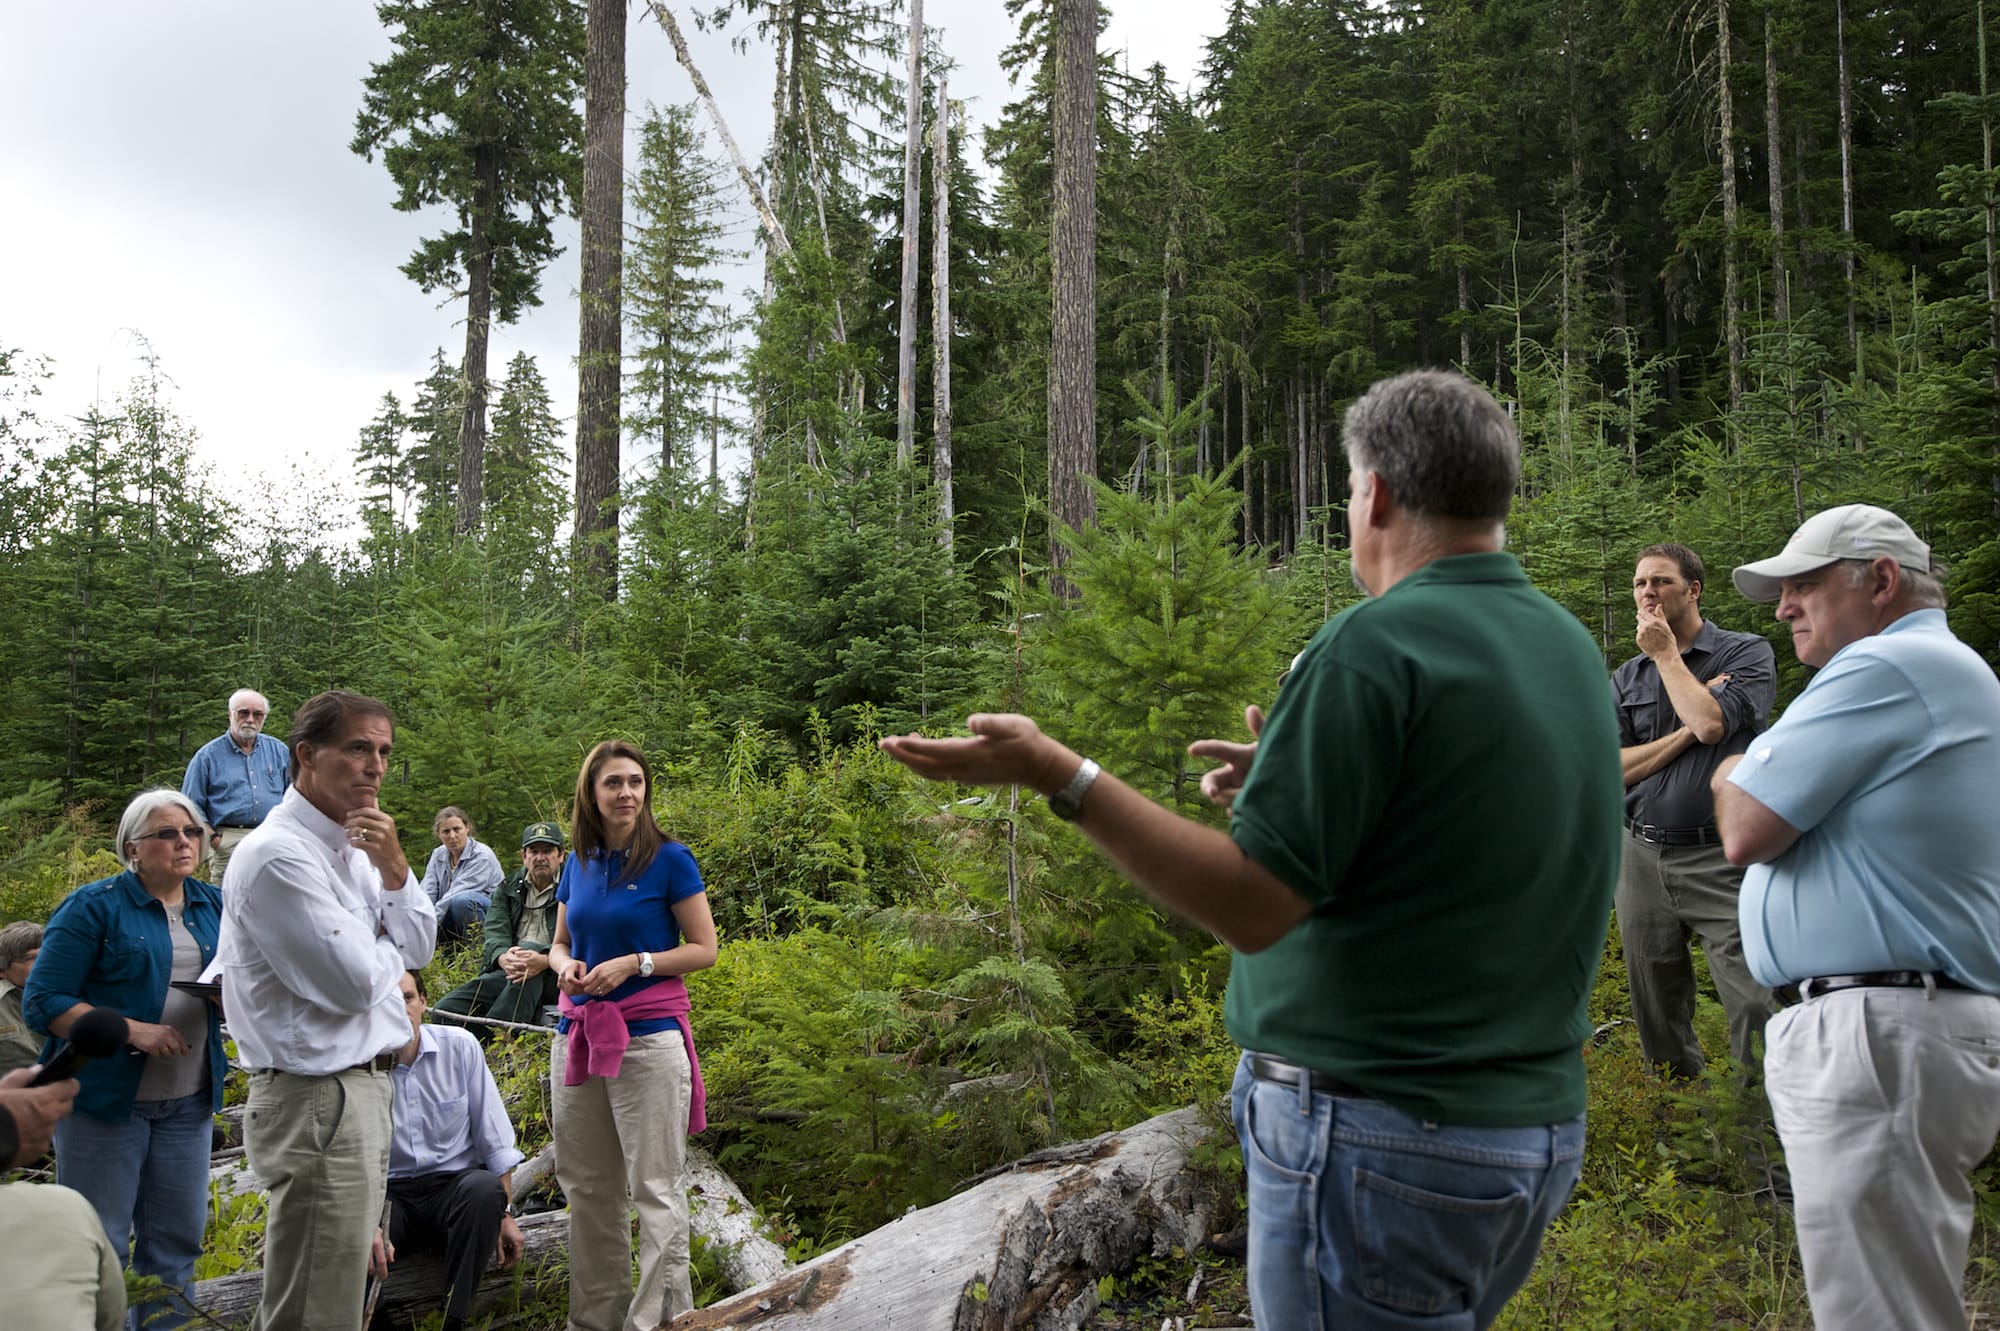 U.S. Rep. Jaime Herrera Beutler, R-Camas, hosted a roundtable discussion and tour of the Gifford Pinchot National Forest with U.S. Fish and Wildlife Service Director Dan Ashe, left, community leaders and other officials, such as Rep. Ed Orcutt, R-Kalama, in August.